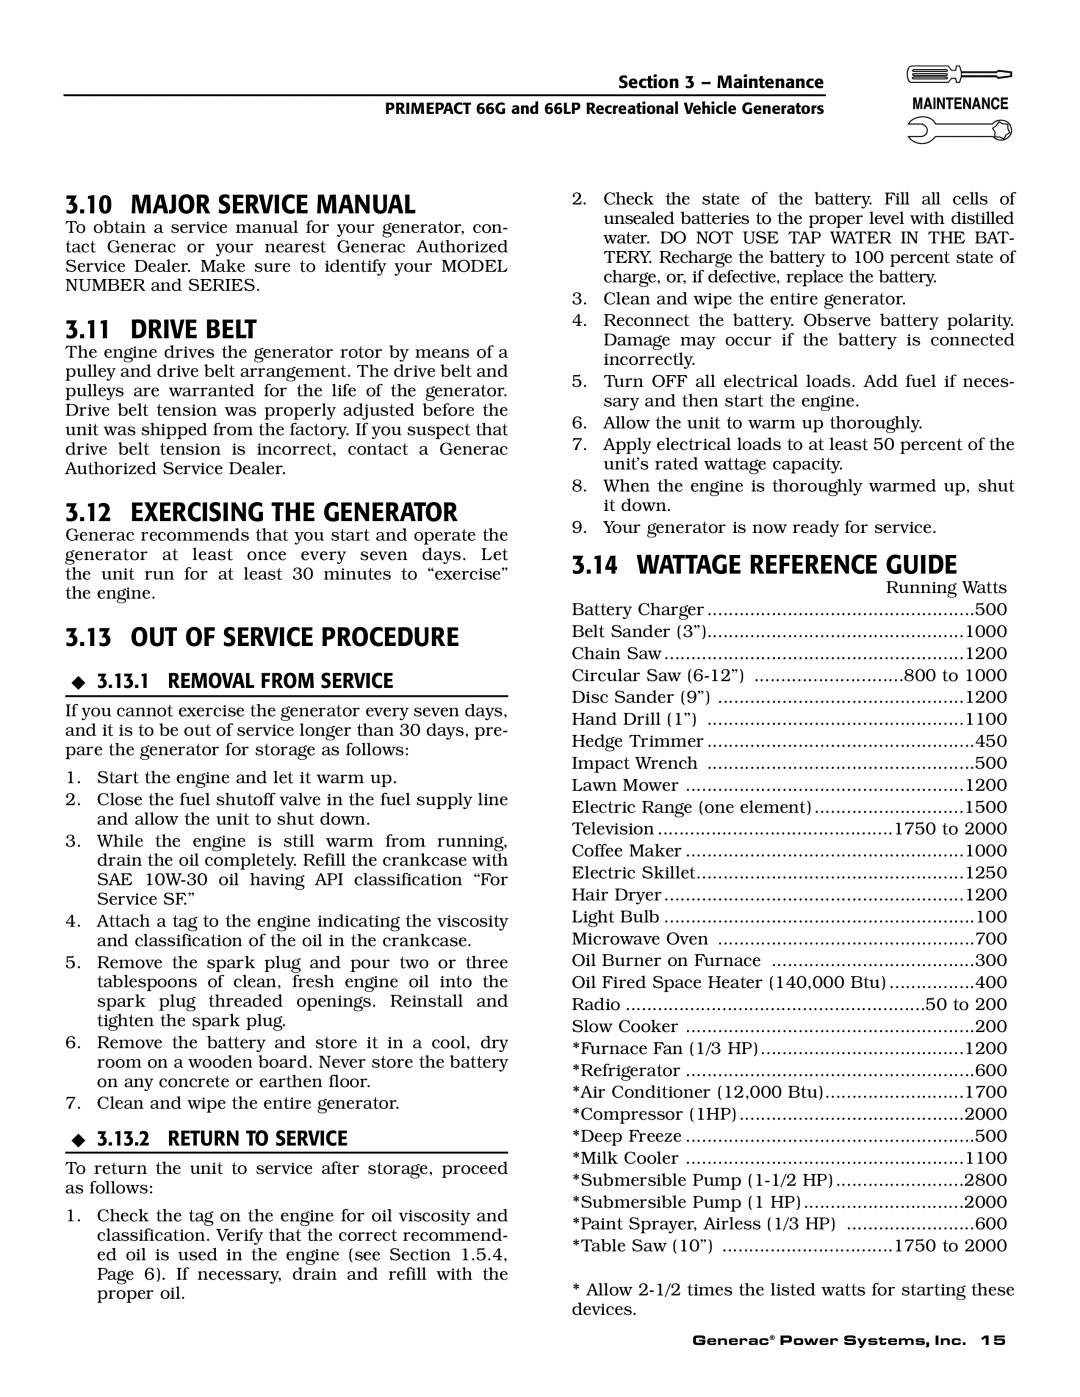 Generac Power Systems 009600-5, 009734-5 Major Service Manual, Drive Belt, Exercising The Generator, Removal From Service 